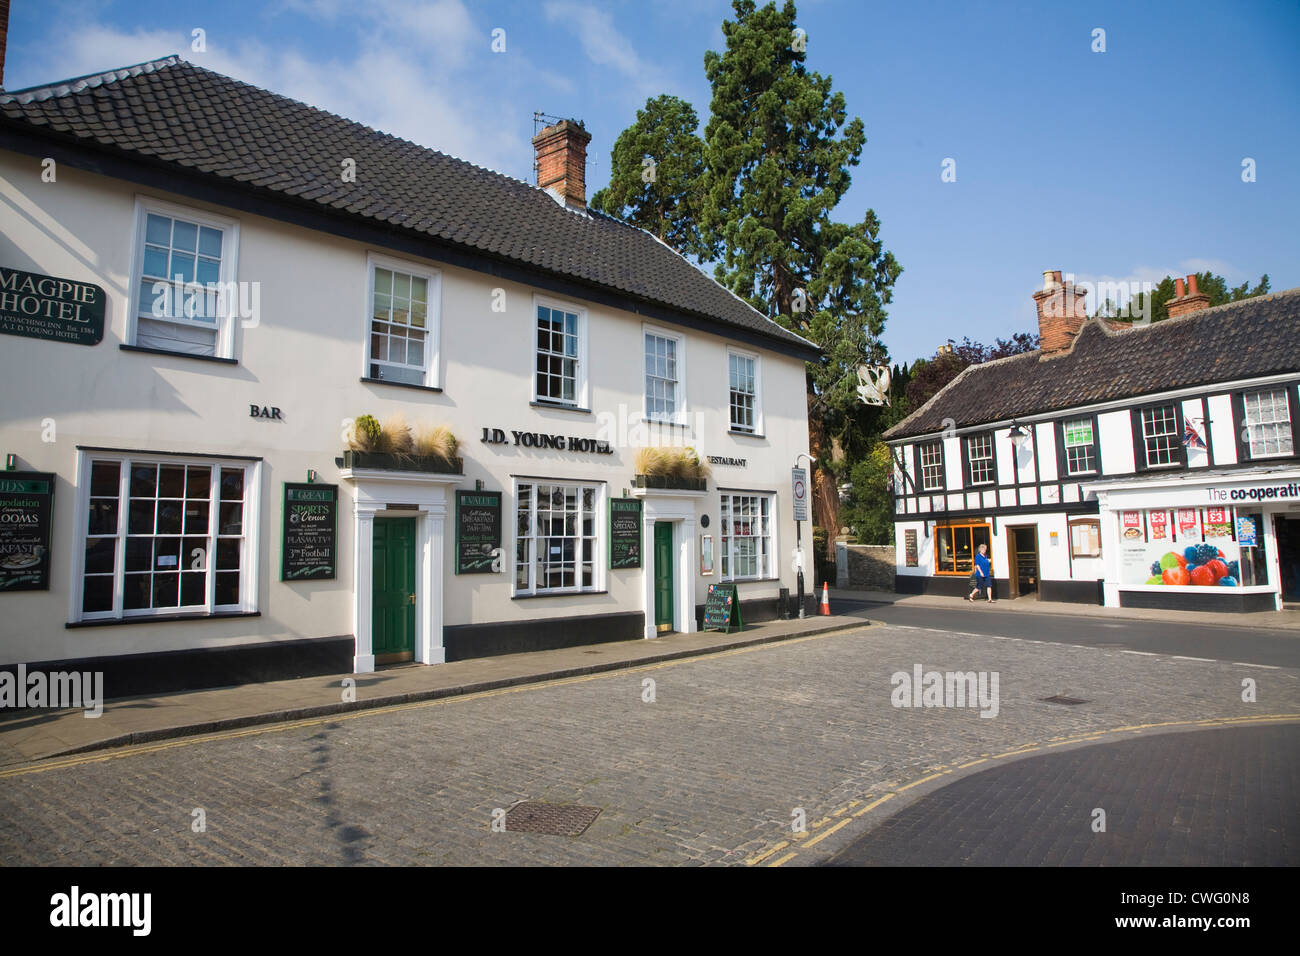 Magpie hotel and shops in the market square Harleston Norfolk England Stock Photo